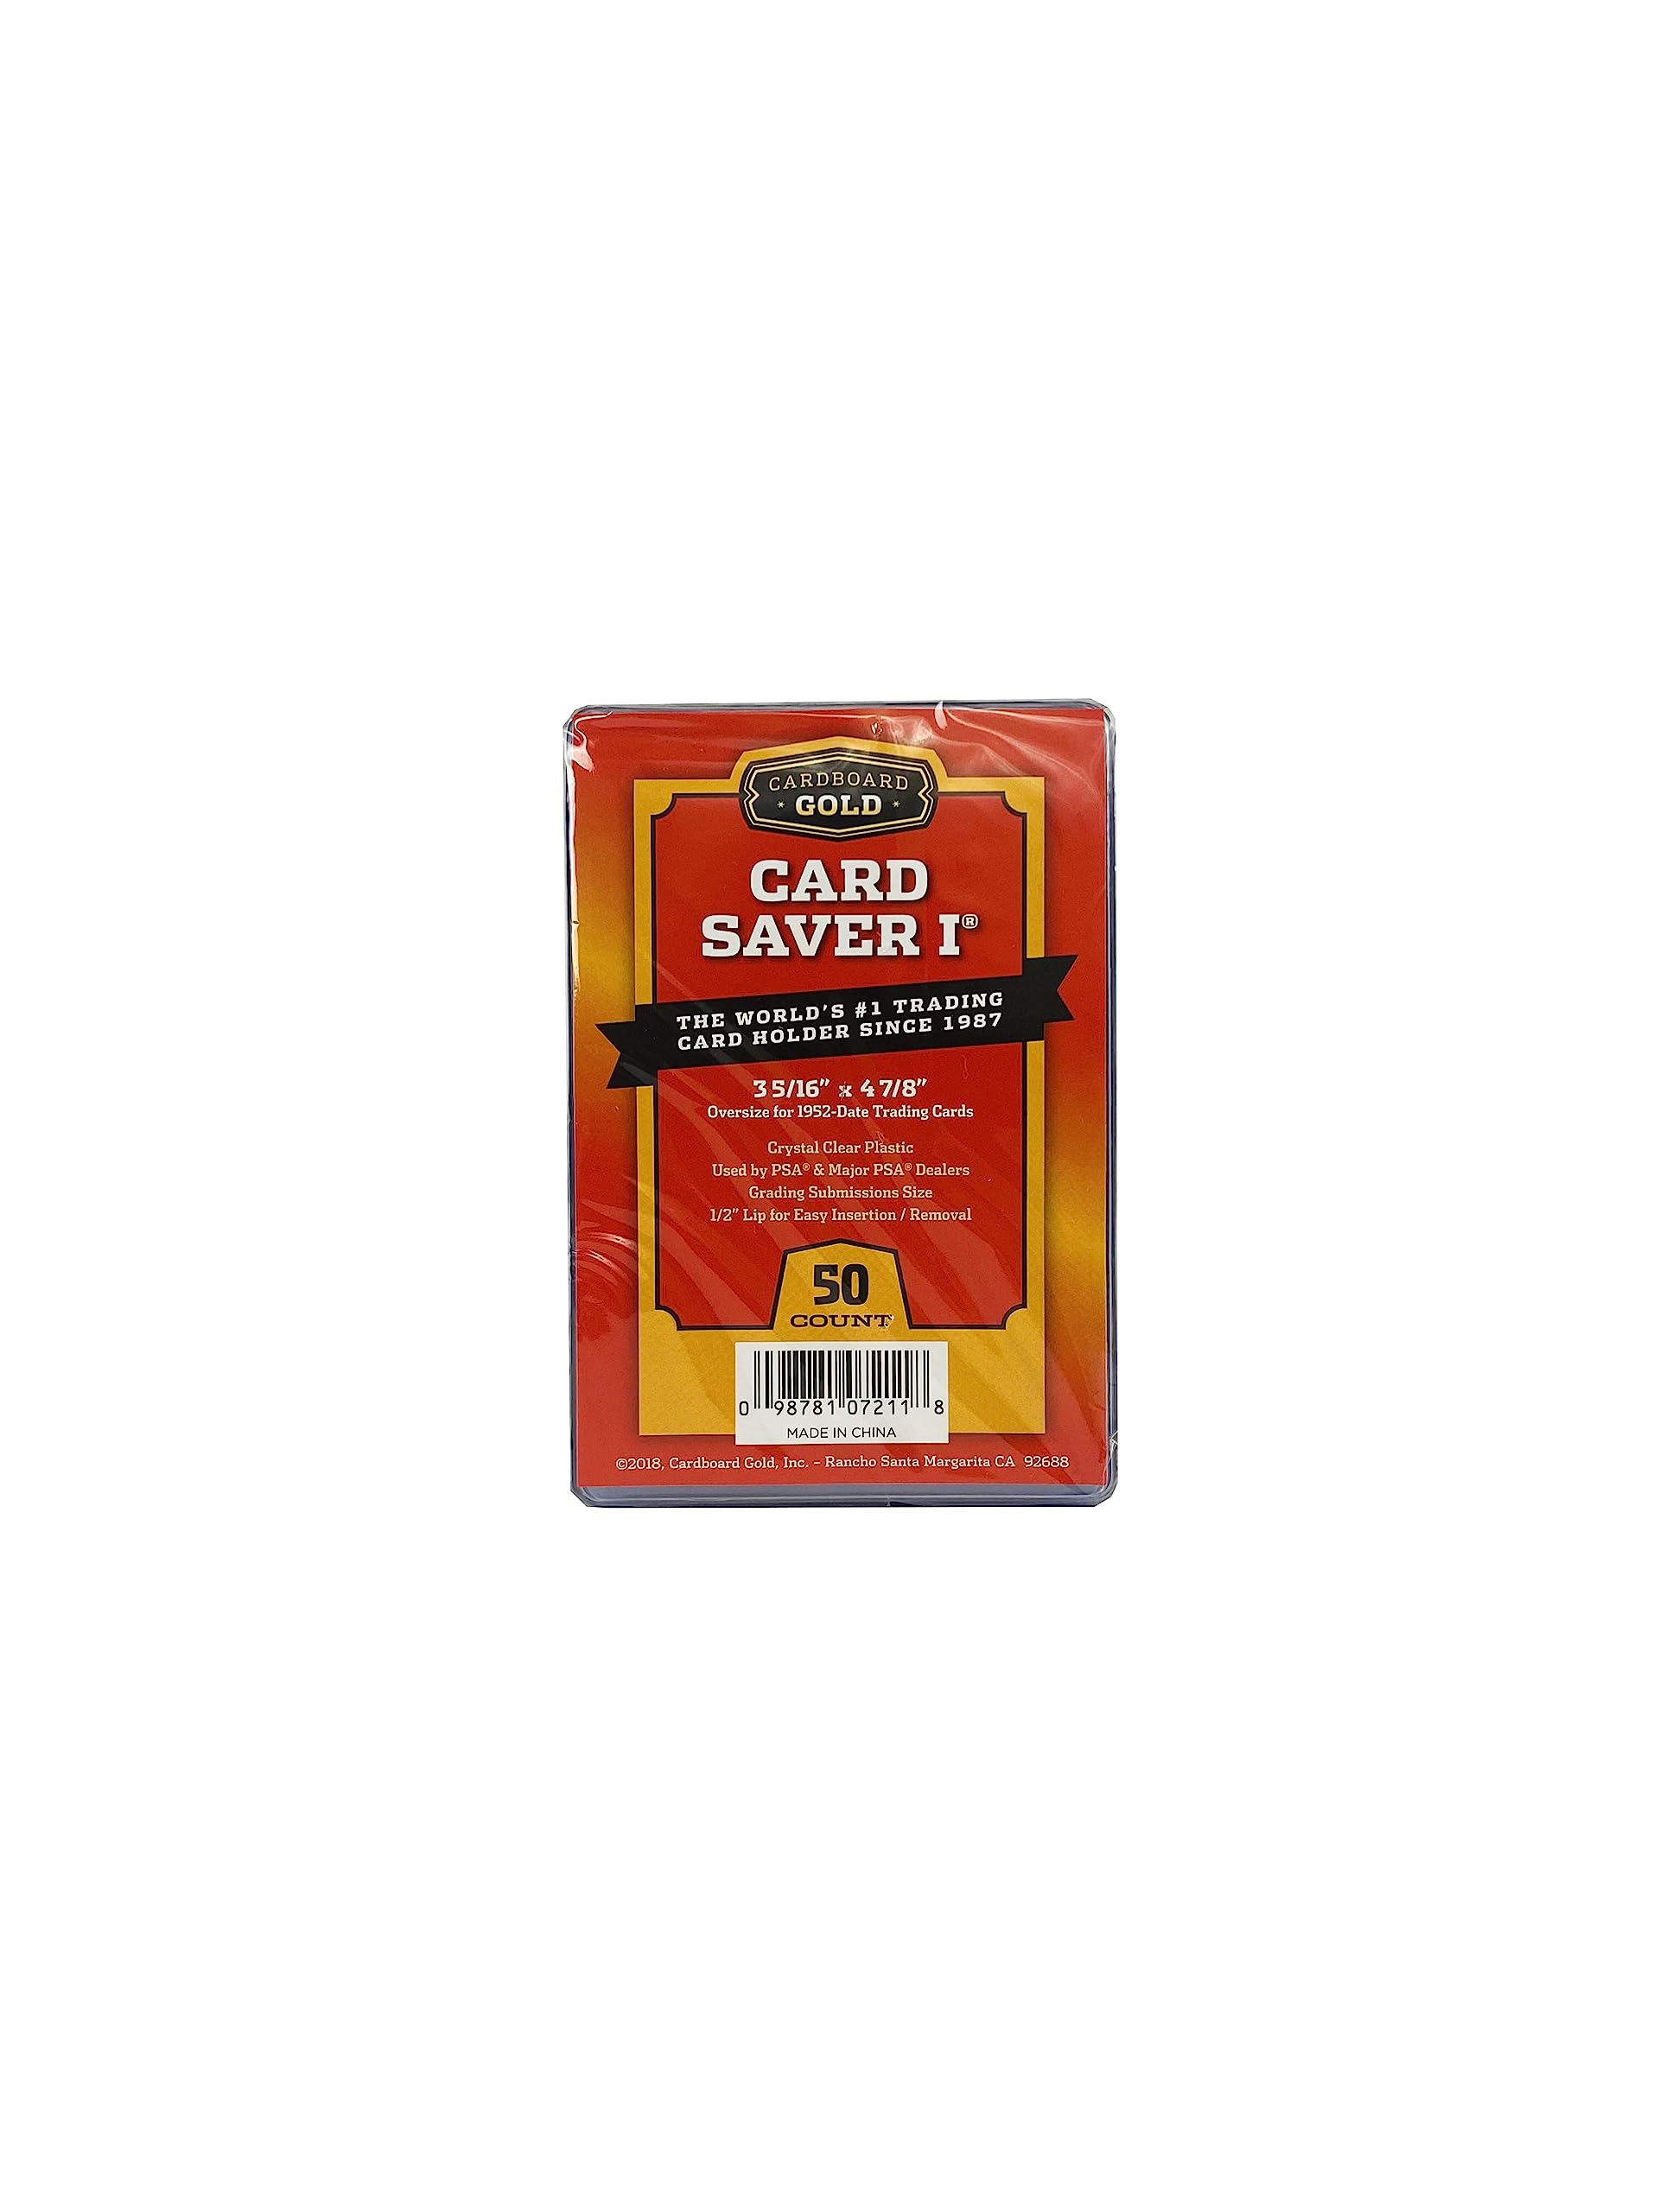 Cardboard Gold Card Saver 1 - 50ct Semi-Rigid Card Holders  - PSA Submission Size